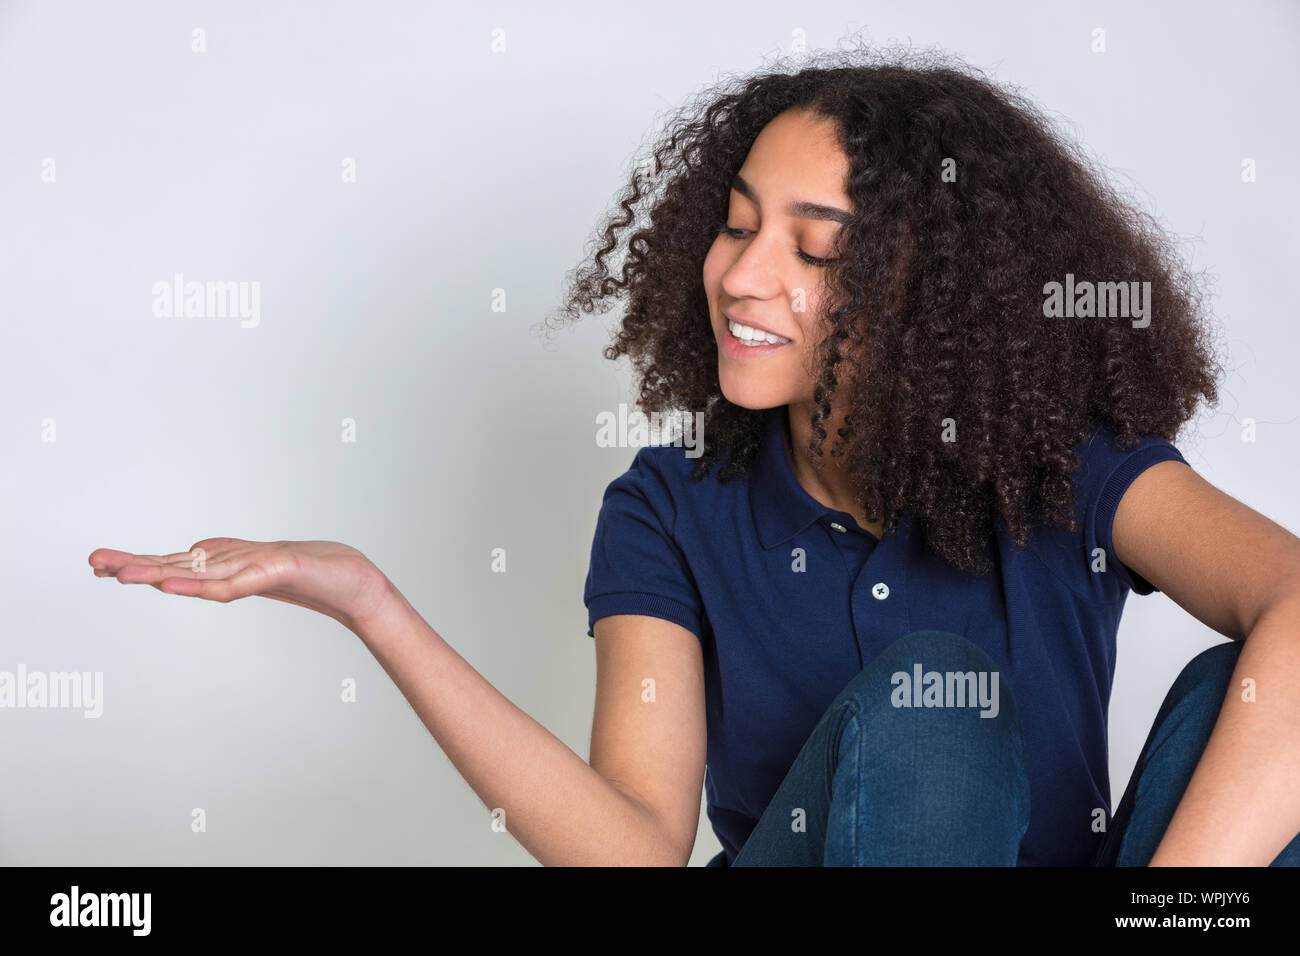 Studio shot of a biracial mixed race African American girl female teen teenager young woman with curly hair,  looking at her empty hand outstretched r Stock Photo